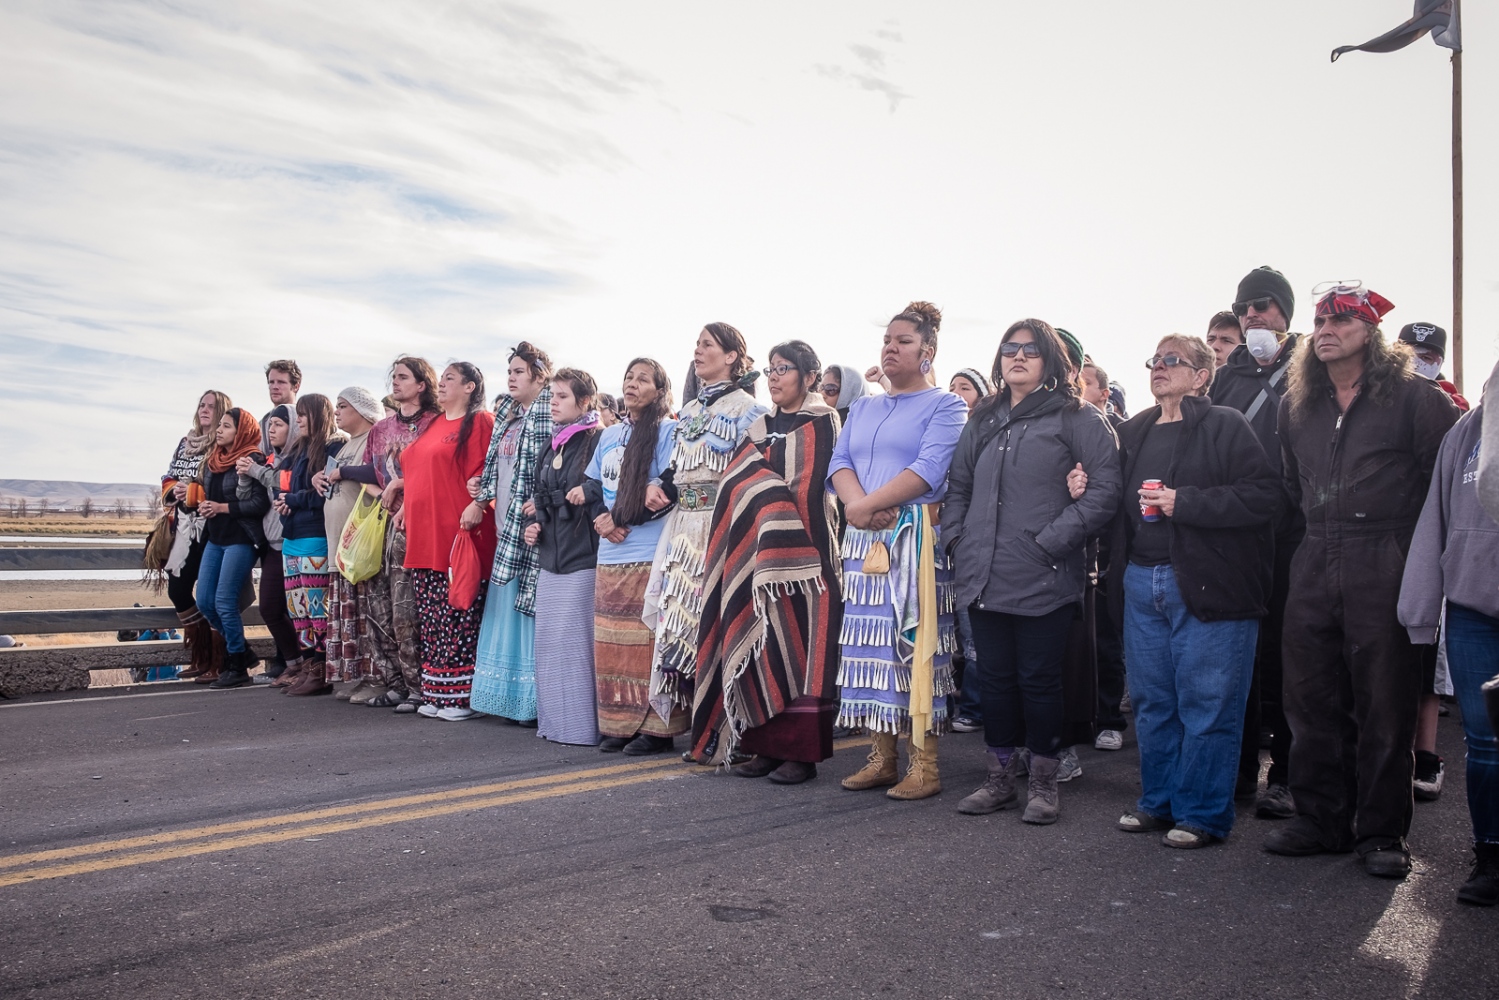 The Stand at Standing Rock